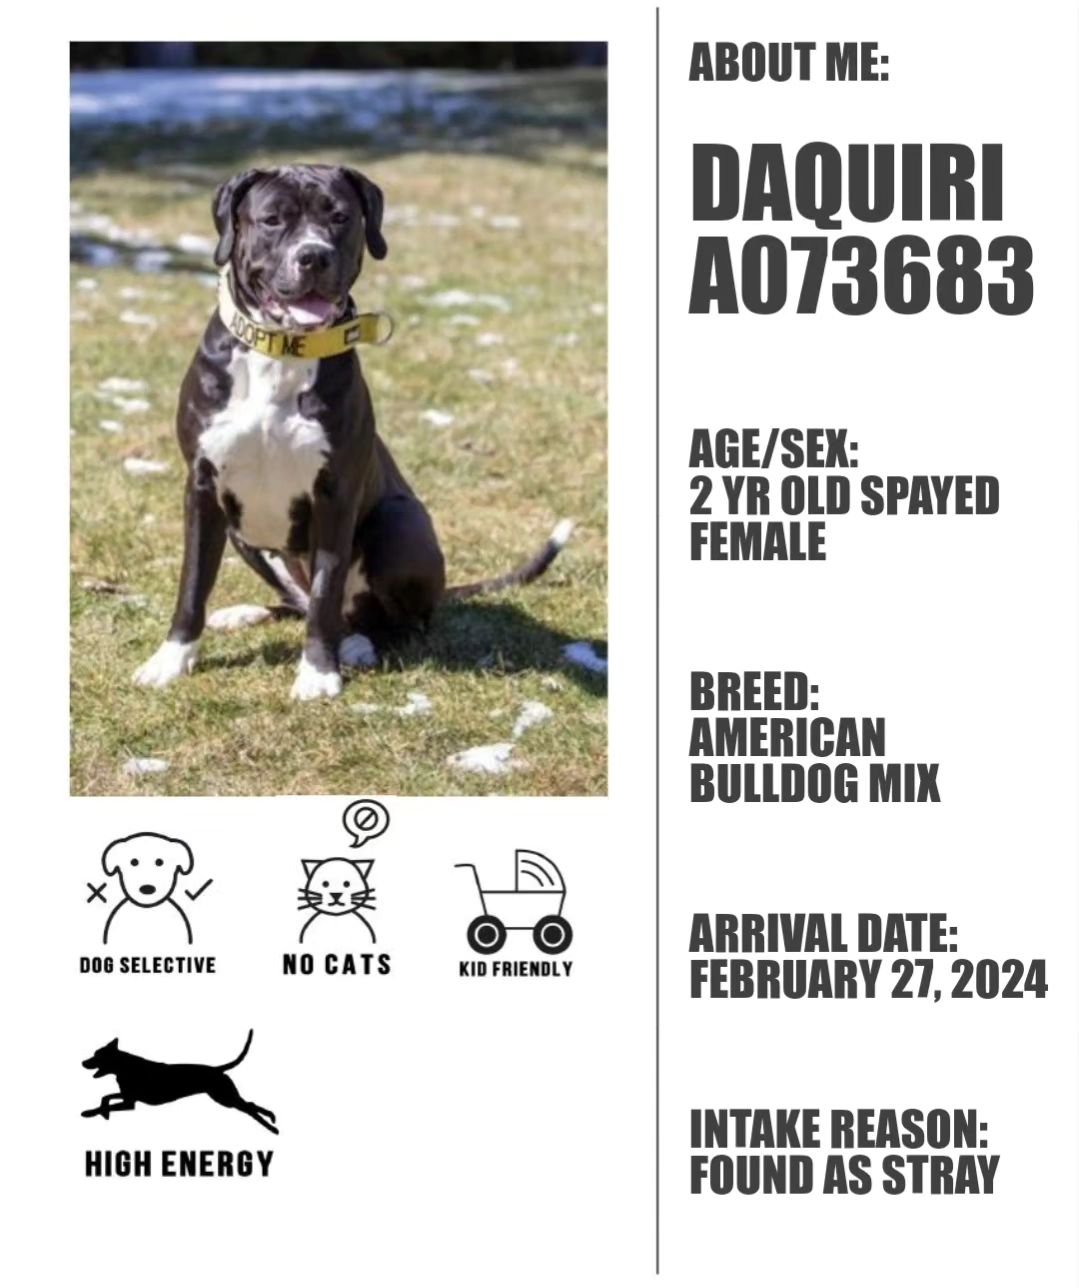 This Race Week we want to highlight Daquiri!

Daiquiri is currently offsite staying at Mutt Manners, (friends of Oshawa Animal Services!). 

Daiquiri is an example of a dog that struggles showing her beautiful self in the shelter environment, and tha